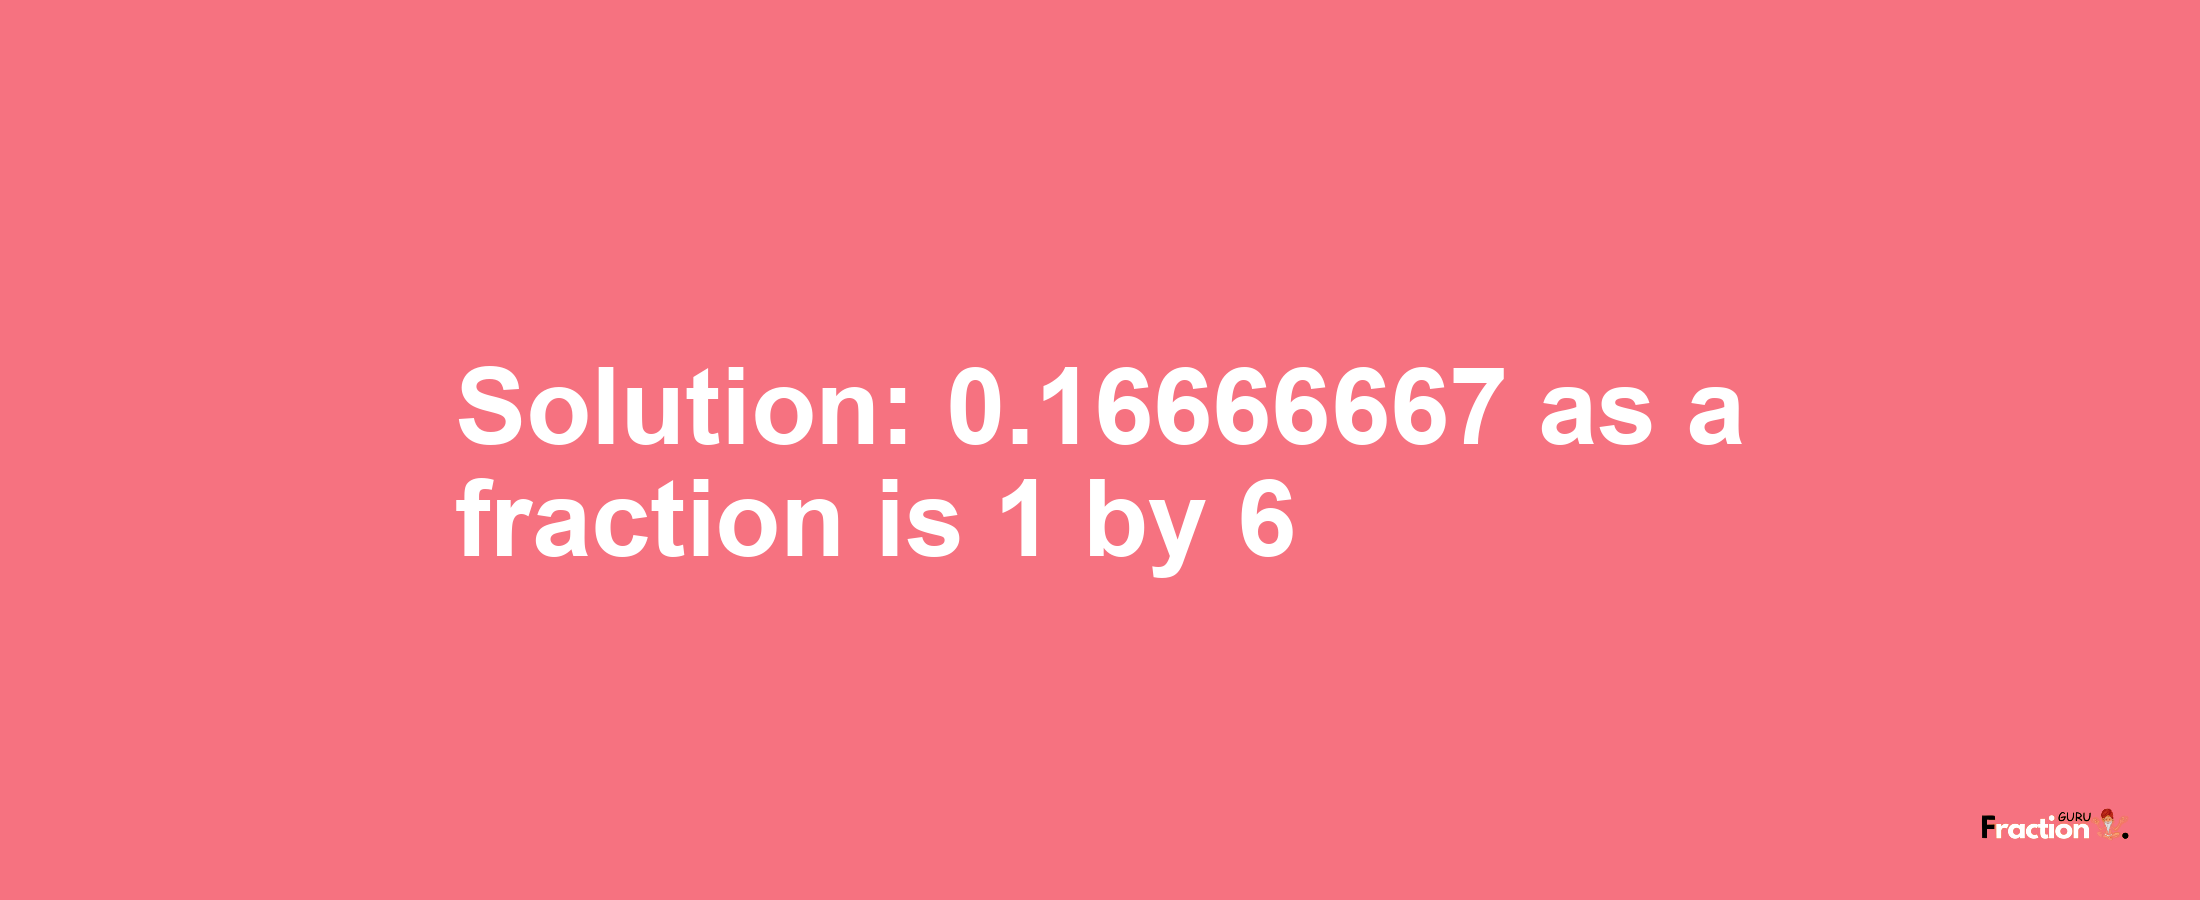 Solution:0.16666667 as a fraction is 1/6